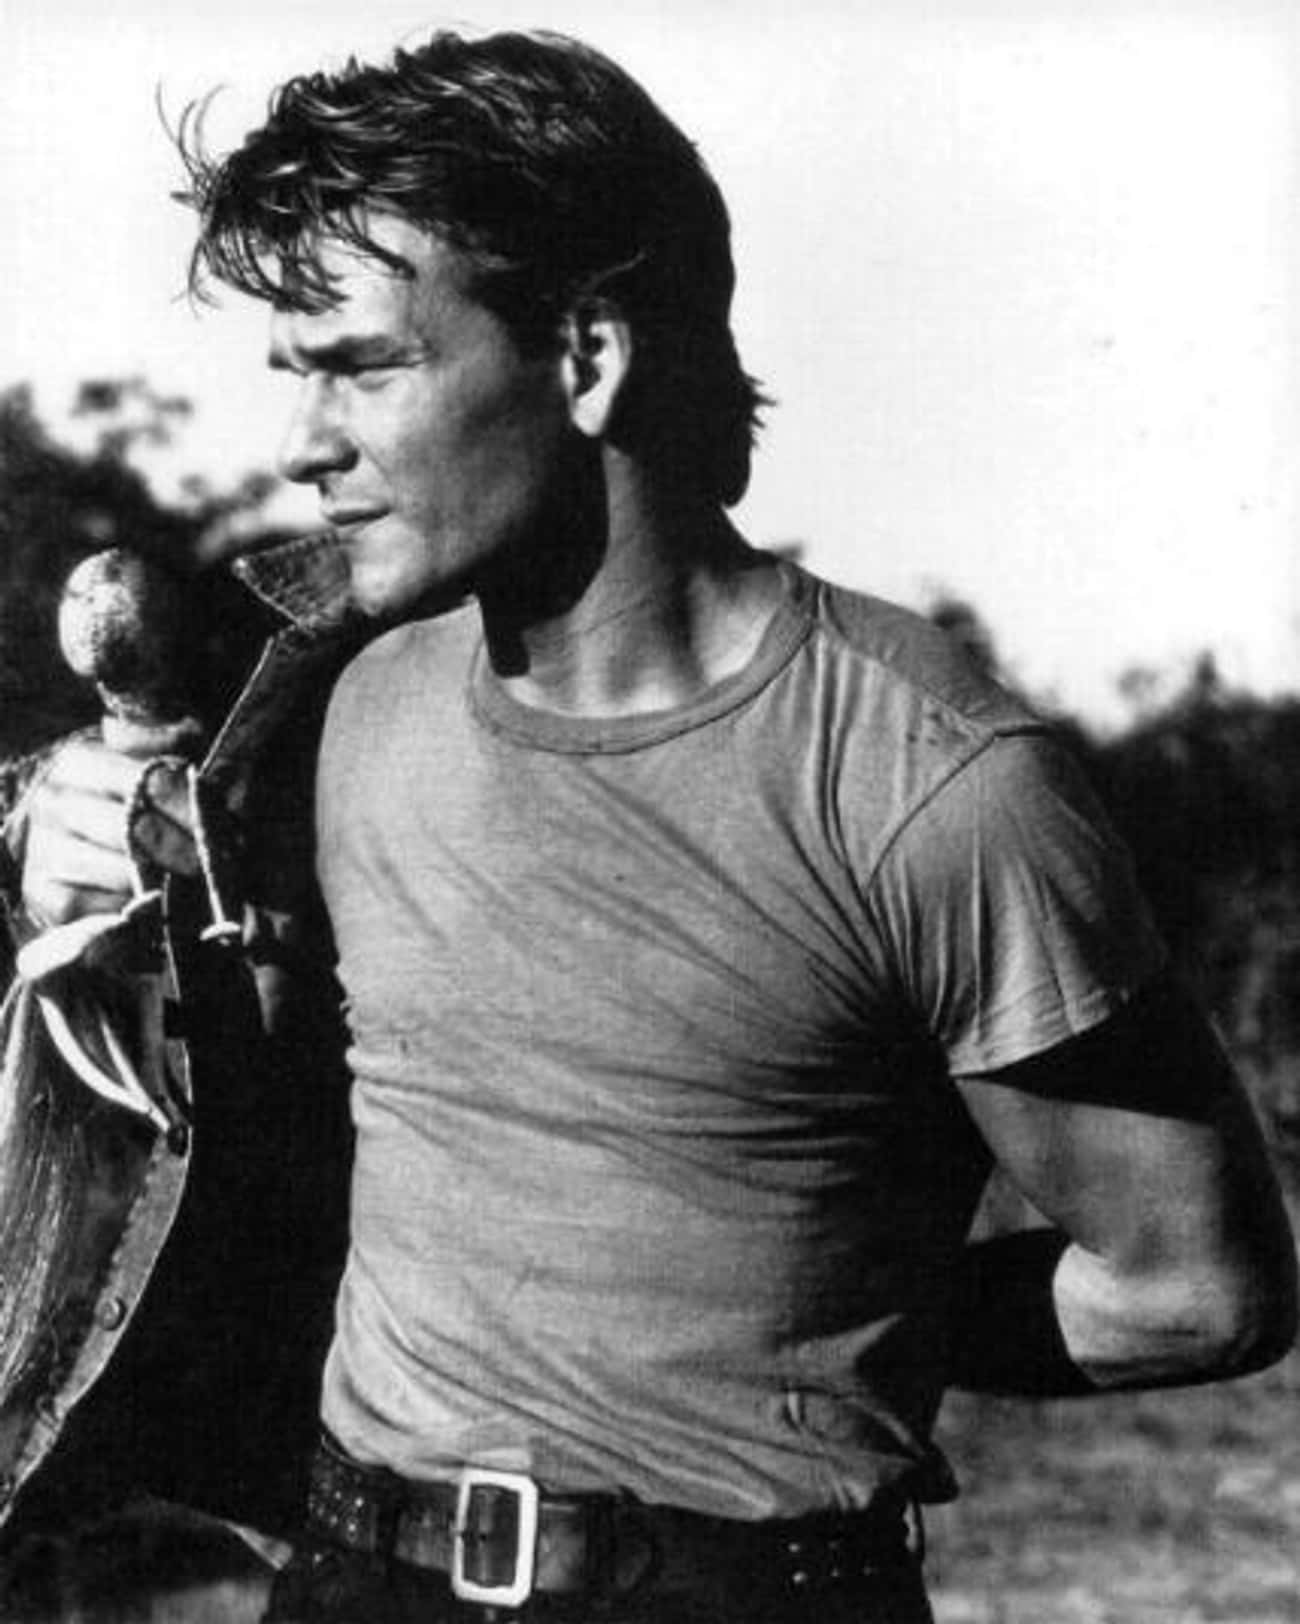 Young Patrick Swayze in Gray T-Shirt and Black Pants